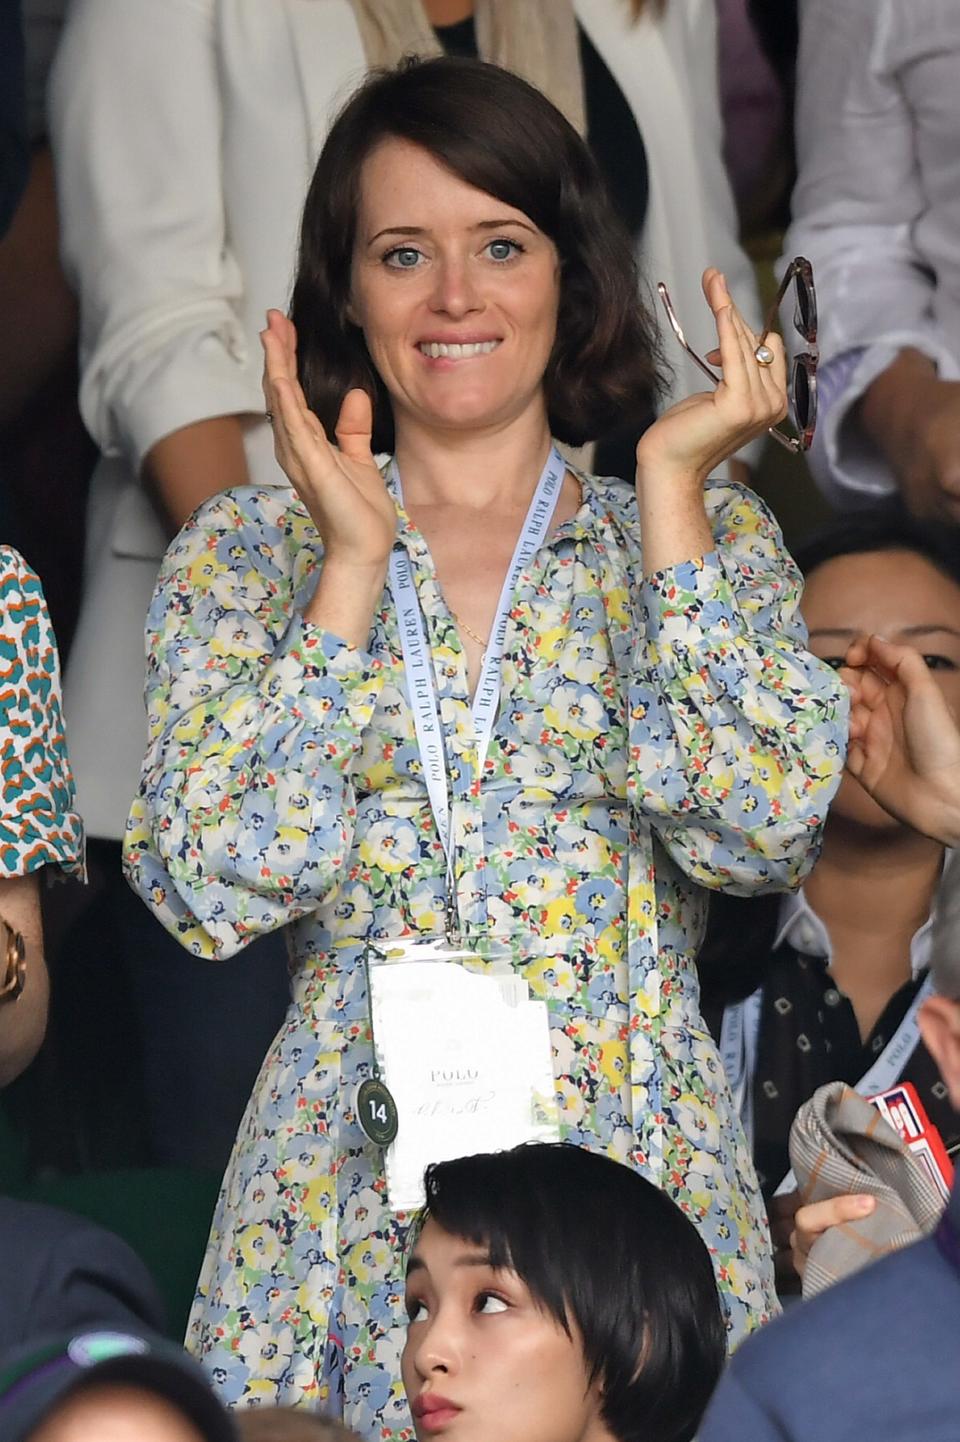 LONDON, ENGLAND - JULY 14: Claire Foy on Centre Court on Men's Finals Day of the Wimbledon Tennis Championships at All England Lawn Tennis and Croquet Club on July 14, 2019 in London, England. (Photo by Karwai Tang/Getty Images) (Photo by Karwai Tang/Getty Images)